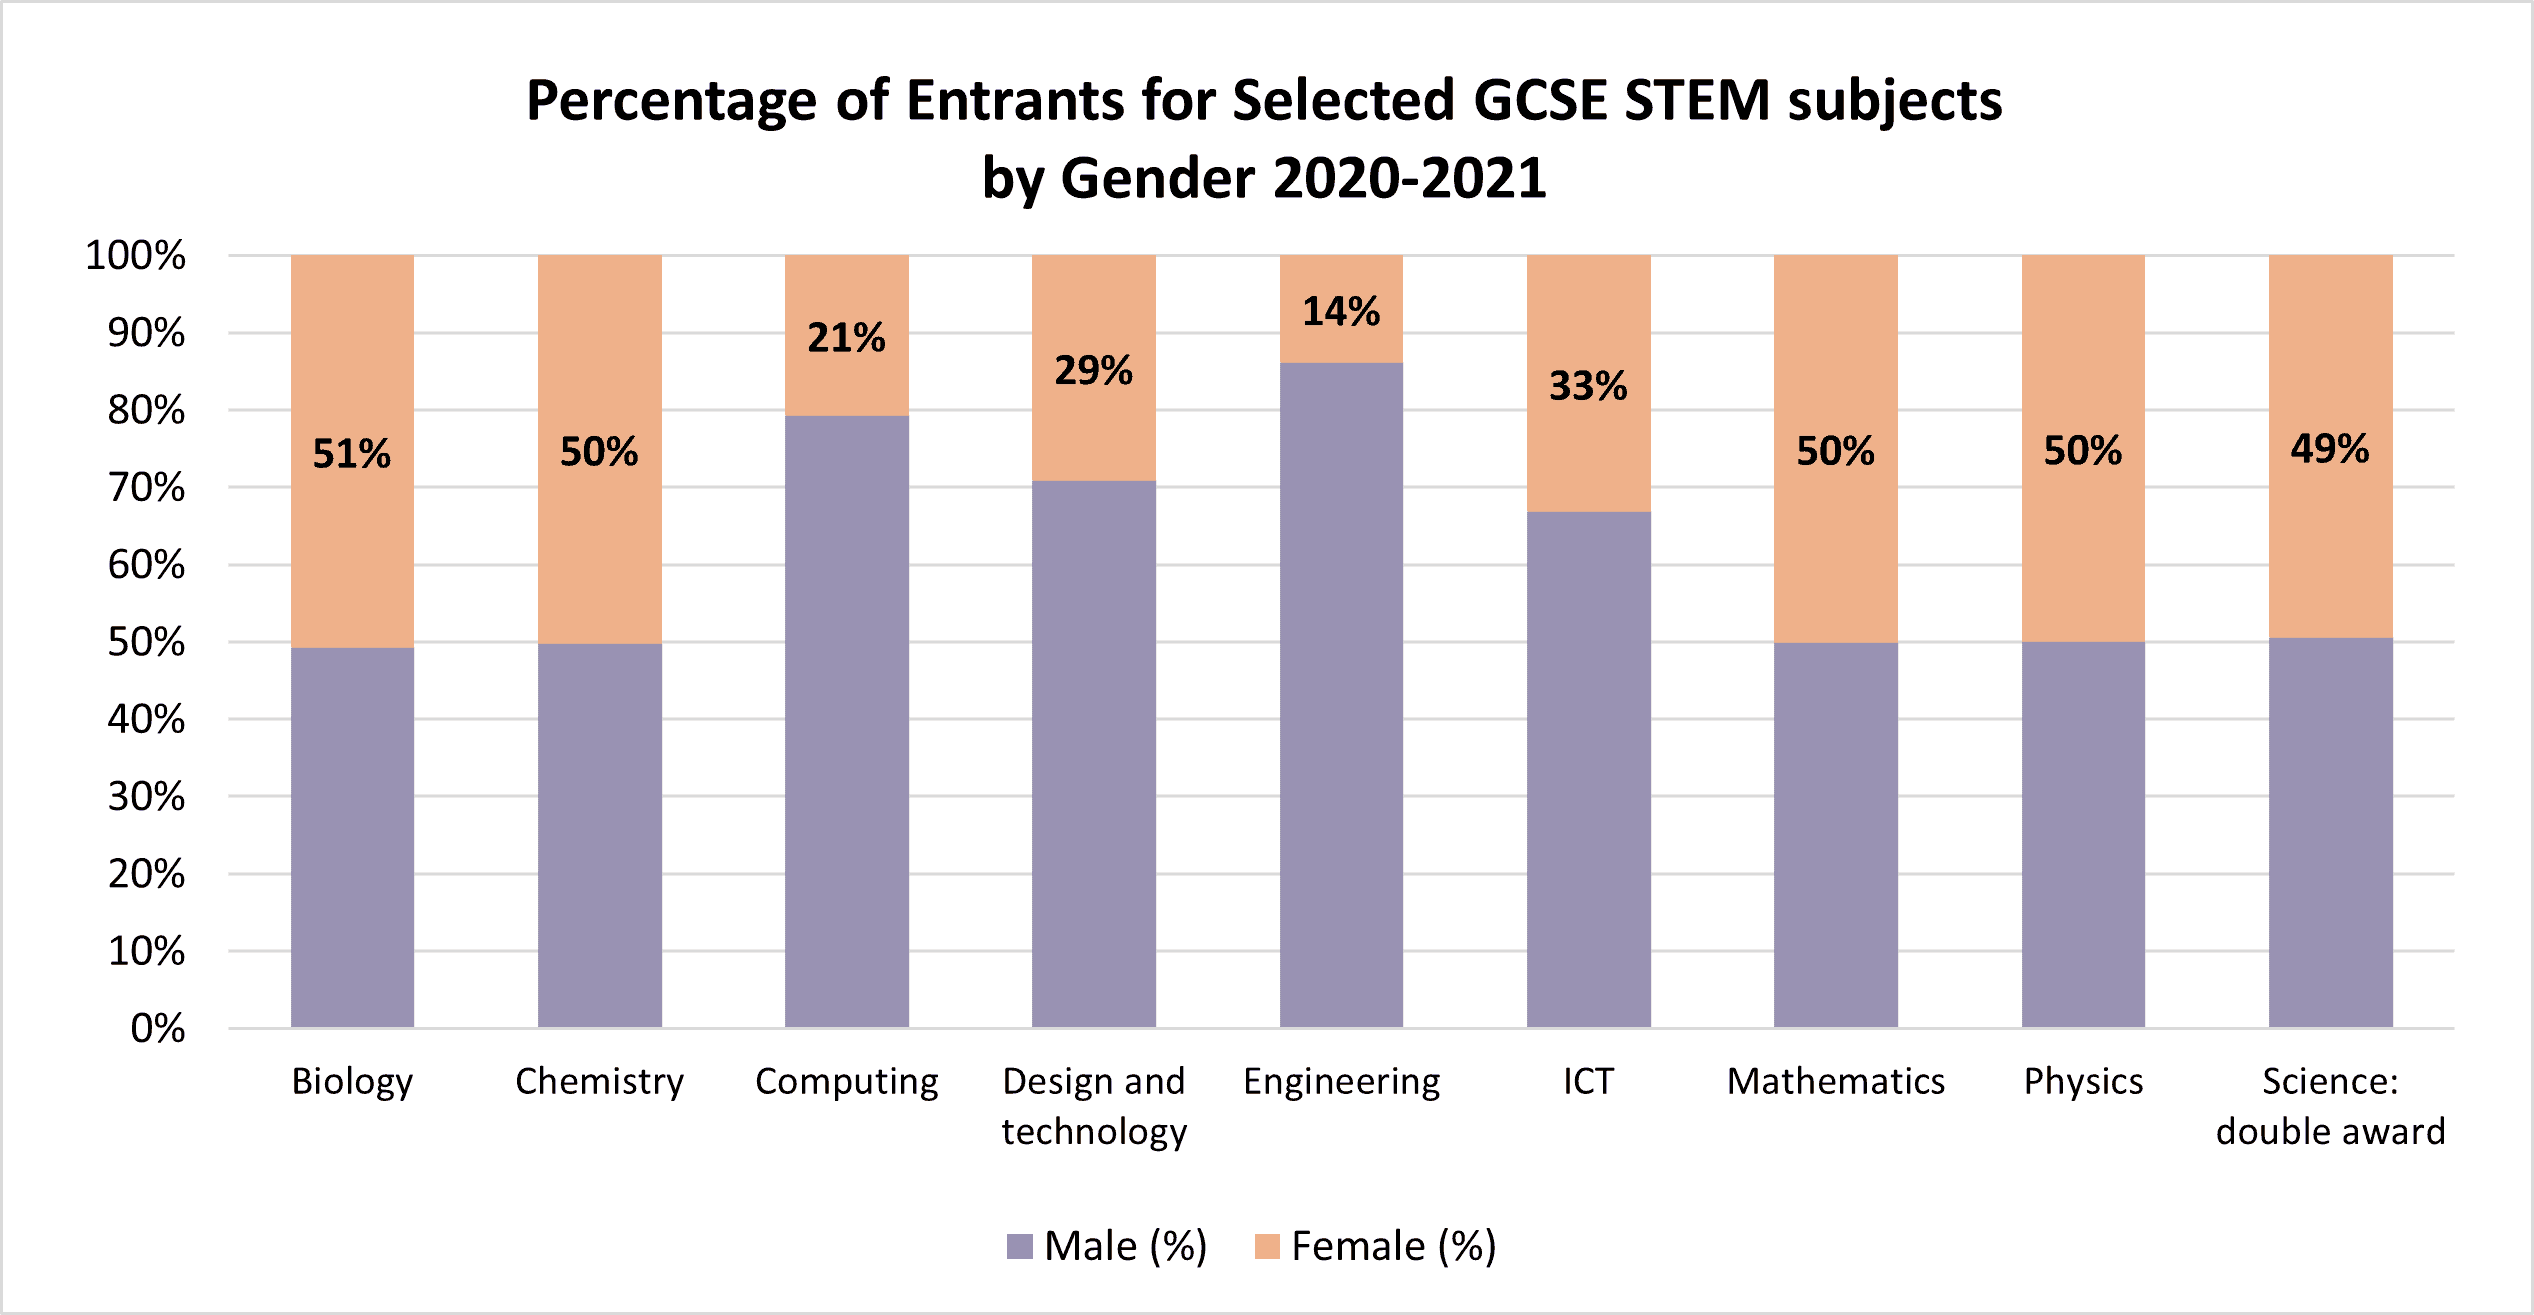 Percentage of Entrants for Selected GCSE STEM subjects by Gender 2020-2021